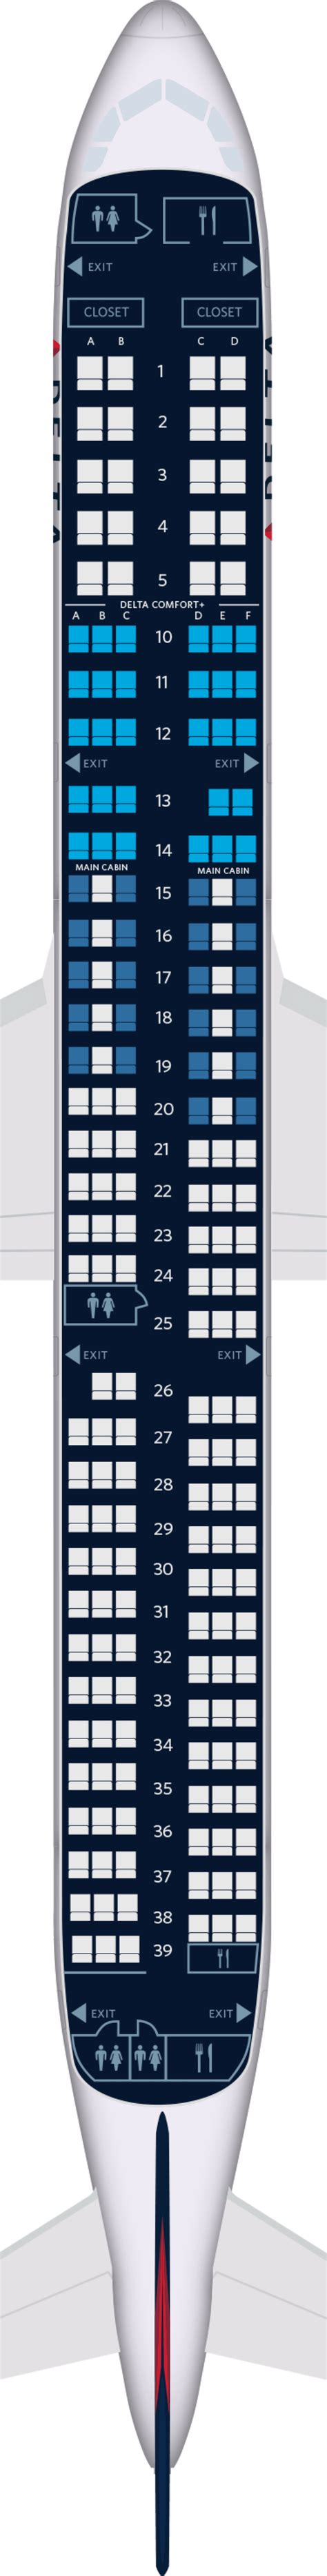 Economy. Seats 209. Pitch 30-31". Width 18". Recline 3". The Airbus A321-200 V.1 series, offers an economy class that's optimized for longer regional routes. Catering to 209 passengers, the environment is spacious with ergonomic seating. A wide range of entertainment options is available, and the crew remains attentive to passenger needs ....